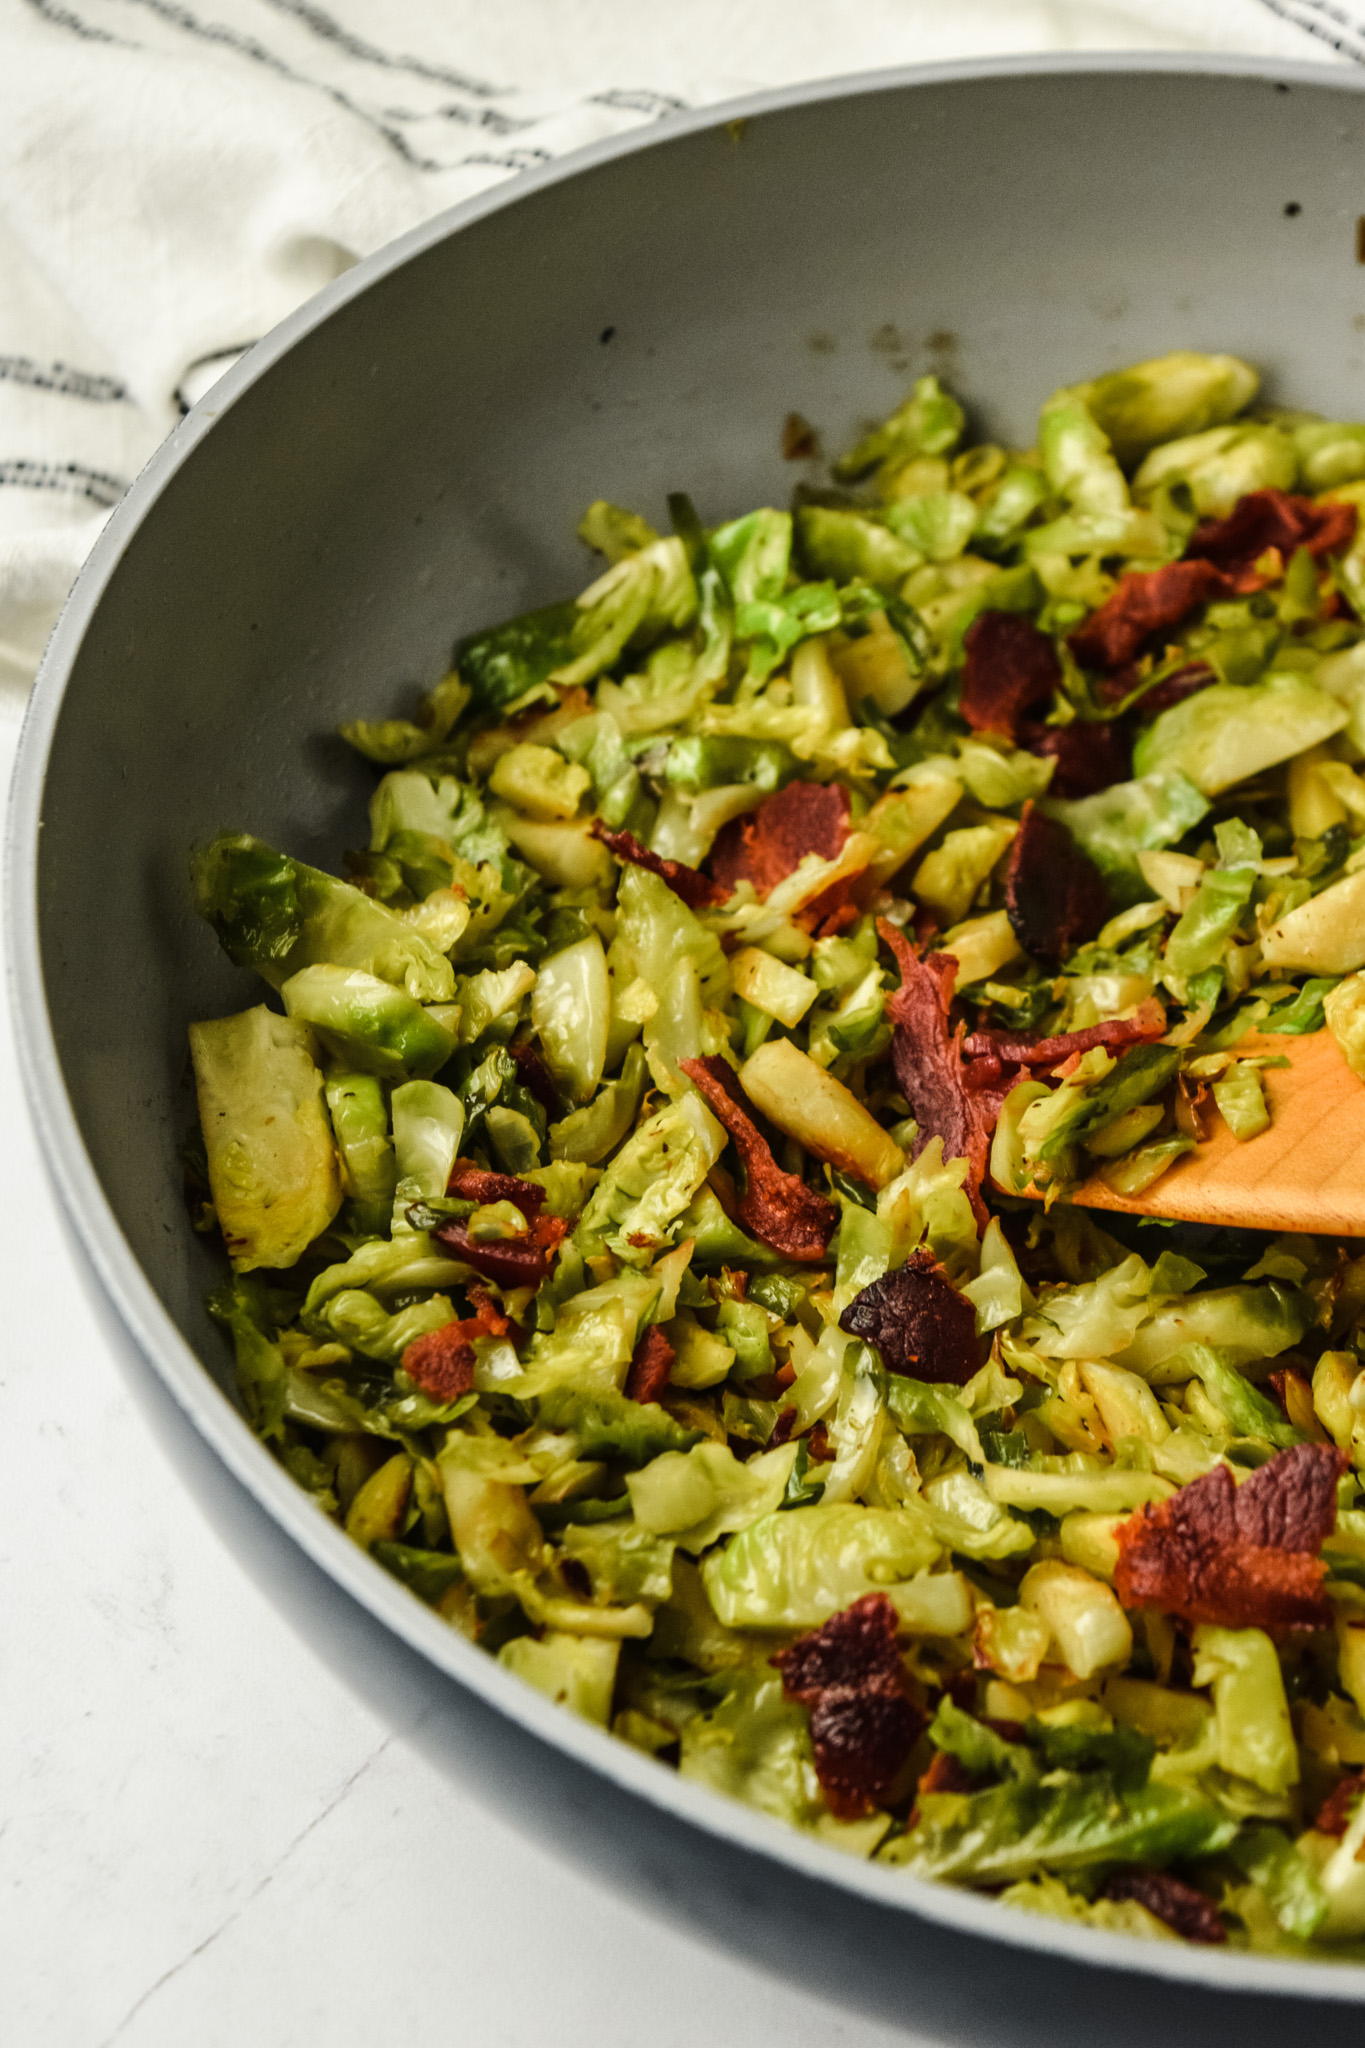 Shredded Brussels Sprouts in Skillet with Bacon